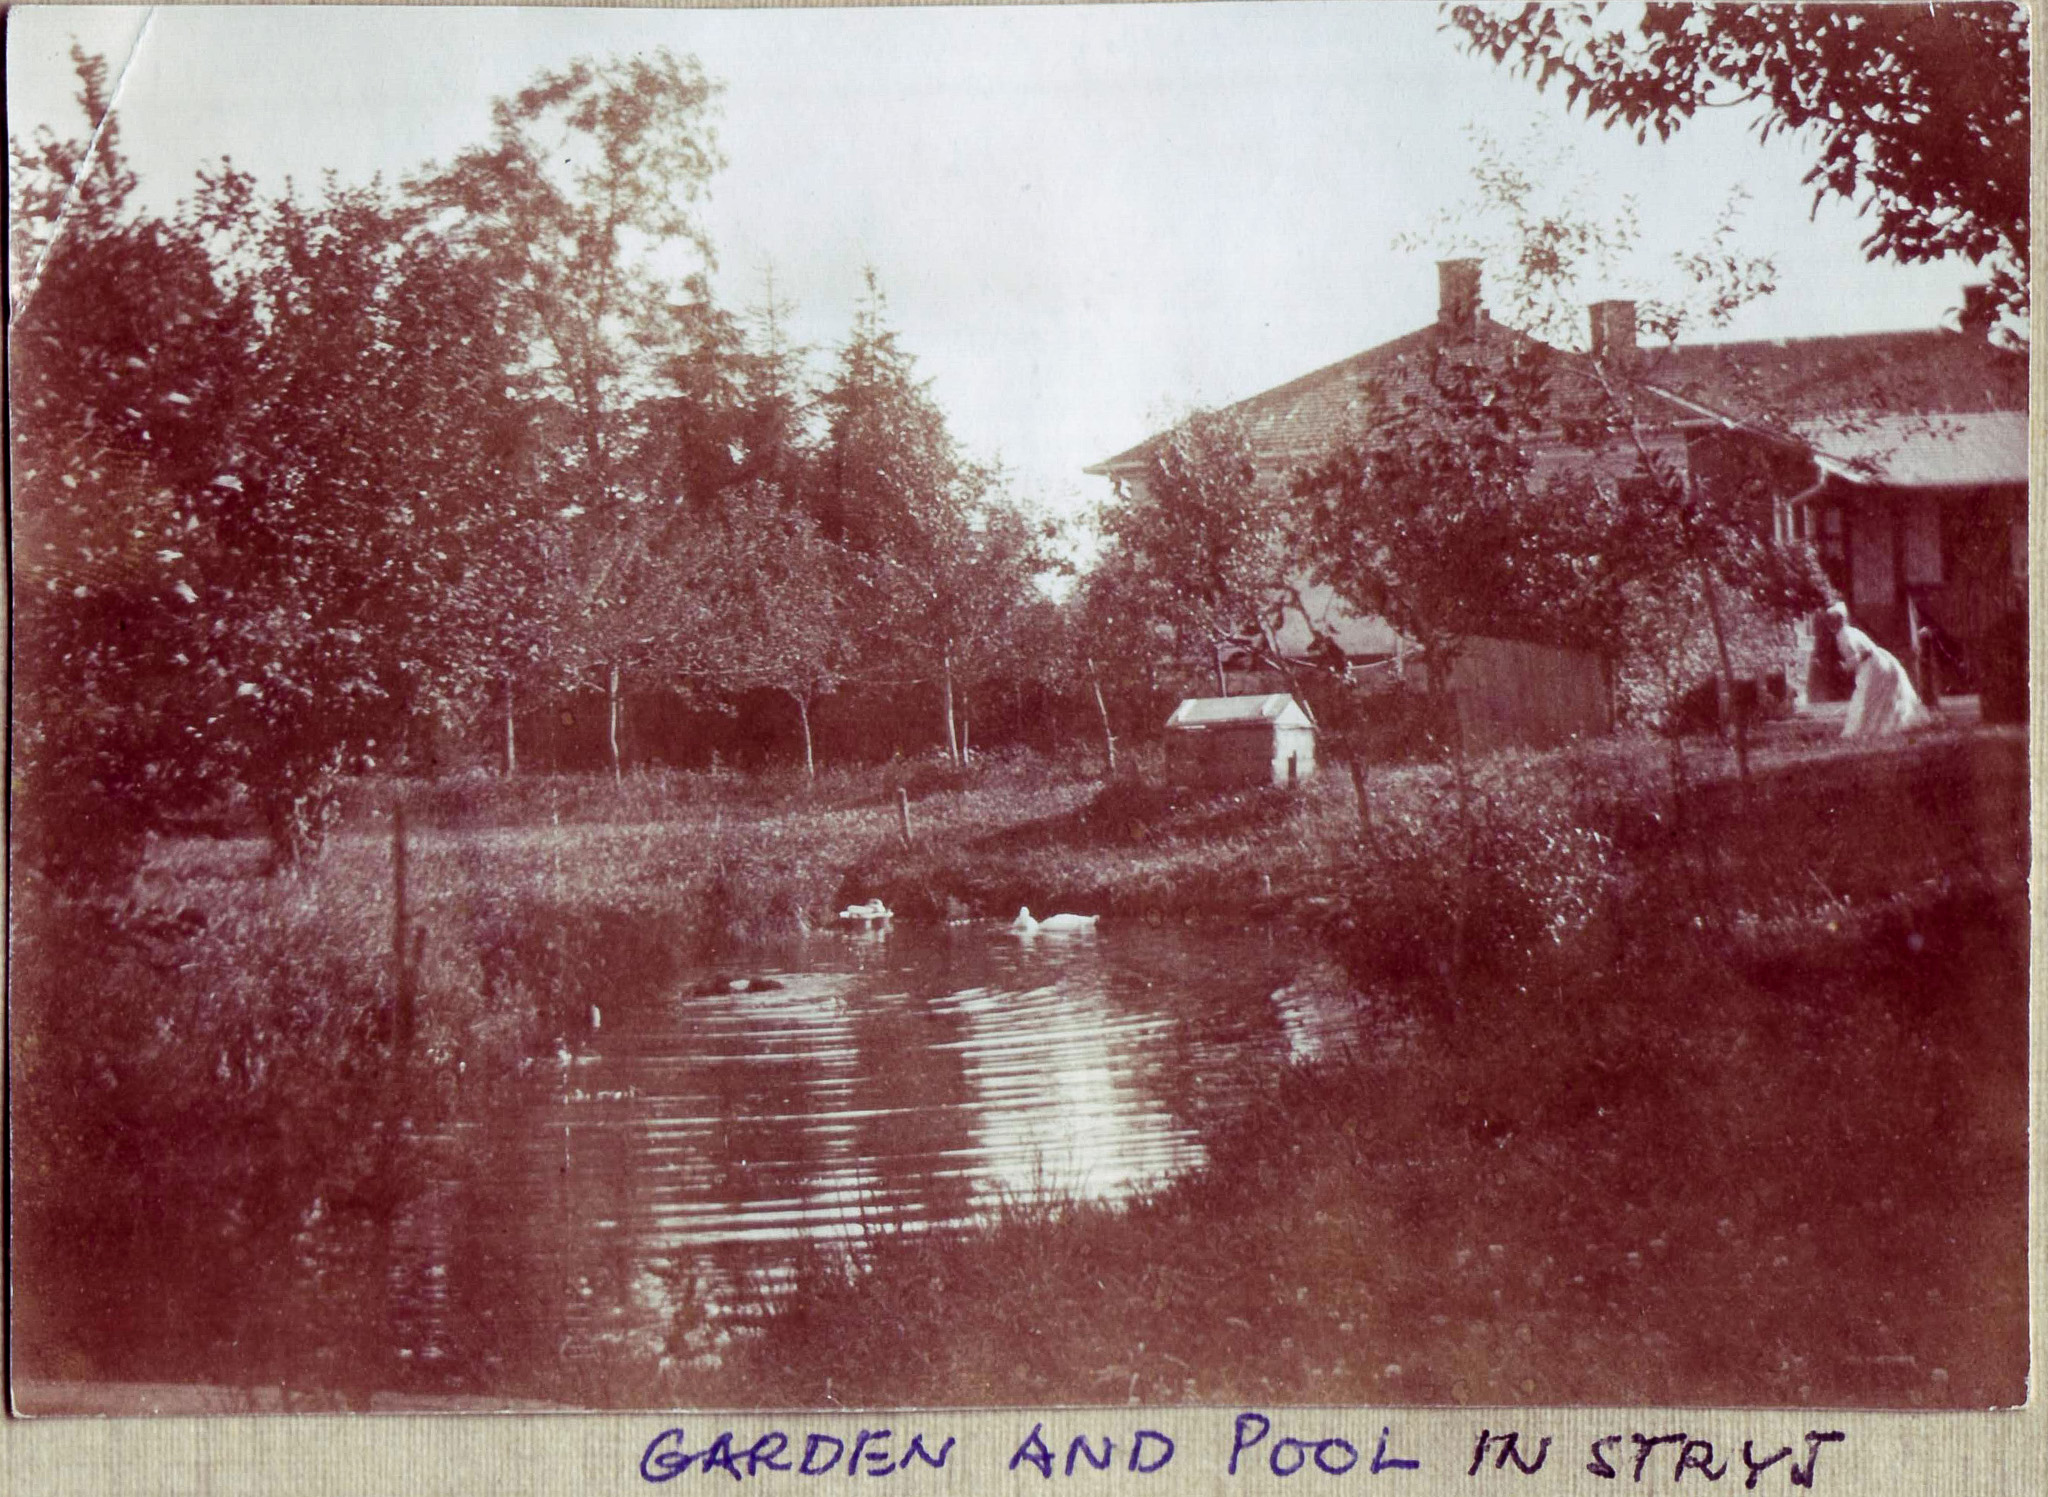 Garden and Pool in Stryj